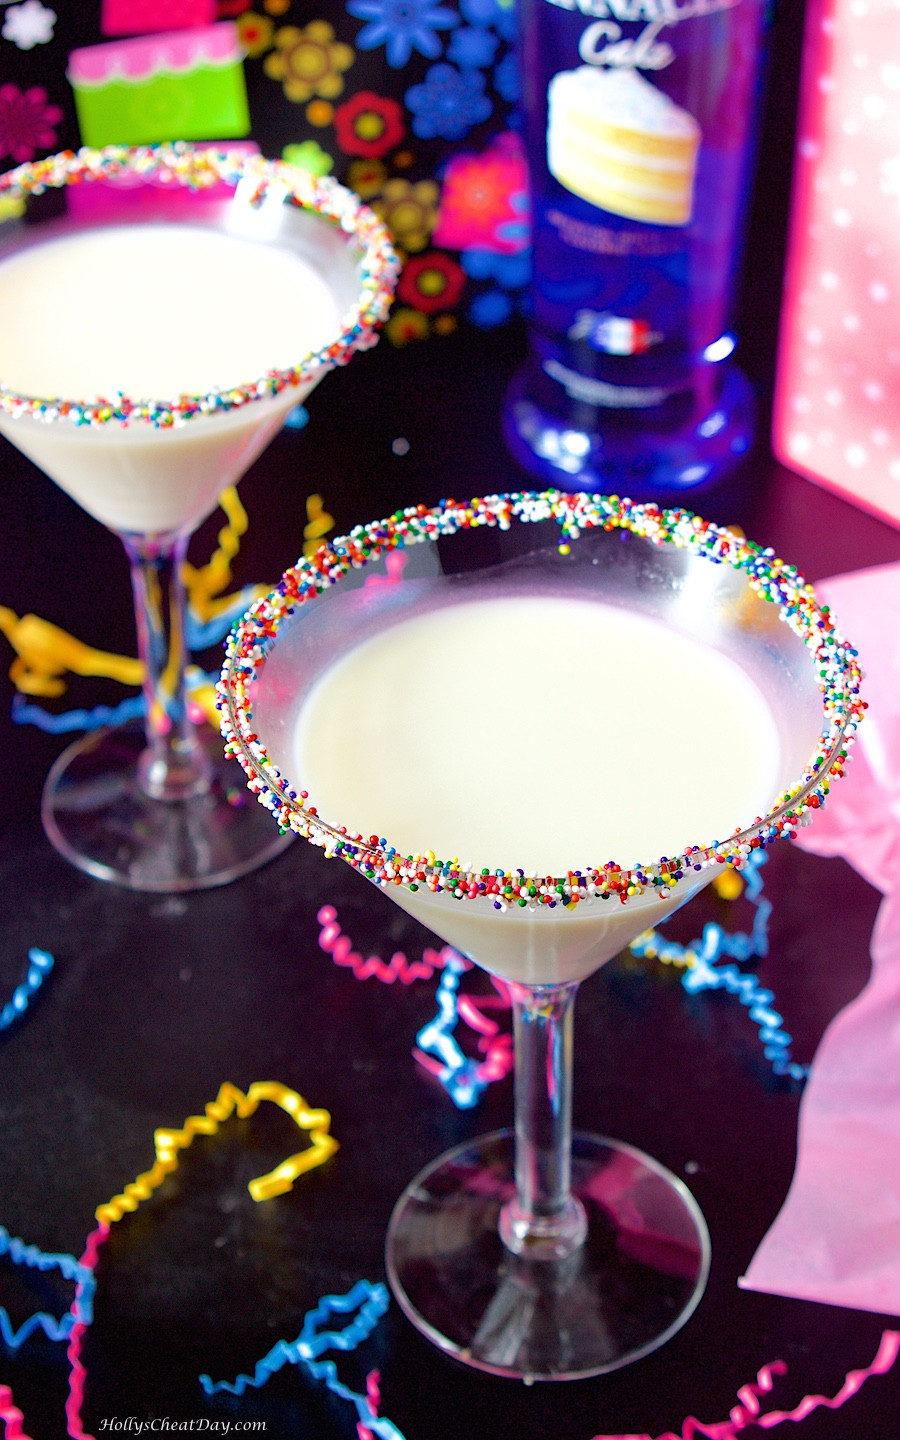 Best ideas about Birthday Cake Drink
. Save or Pin Birthday Cake Martini 100th Post HOLLY S CHEAT DAY Now.